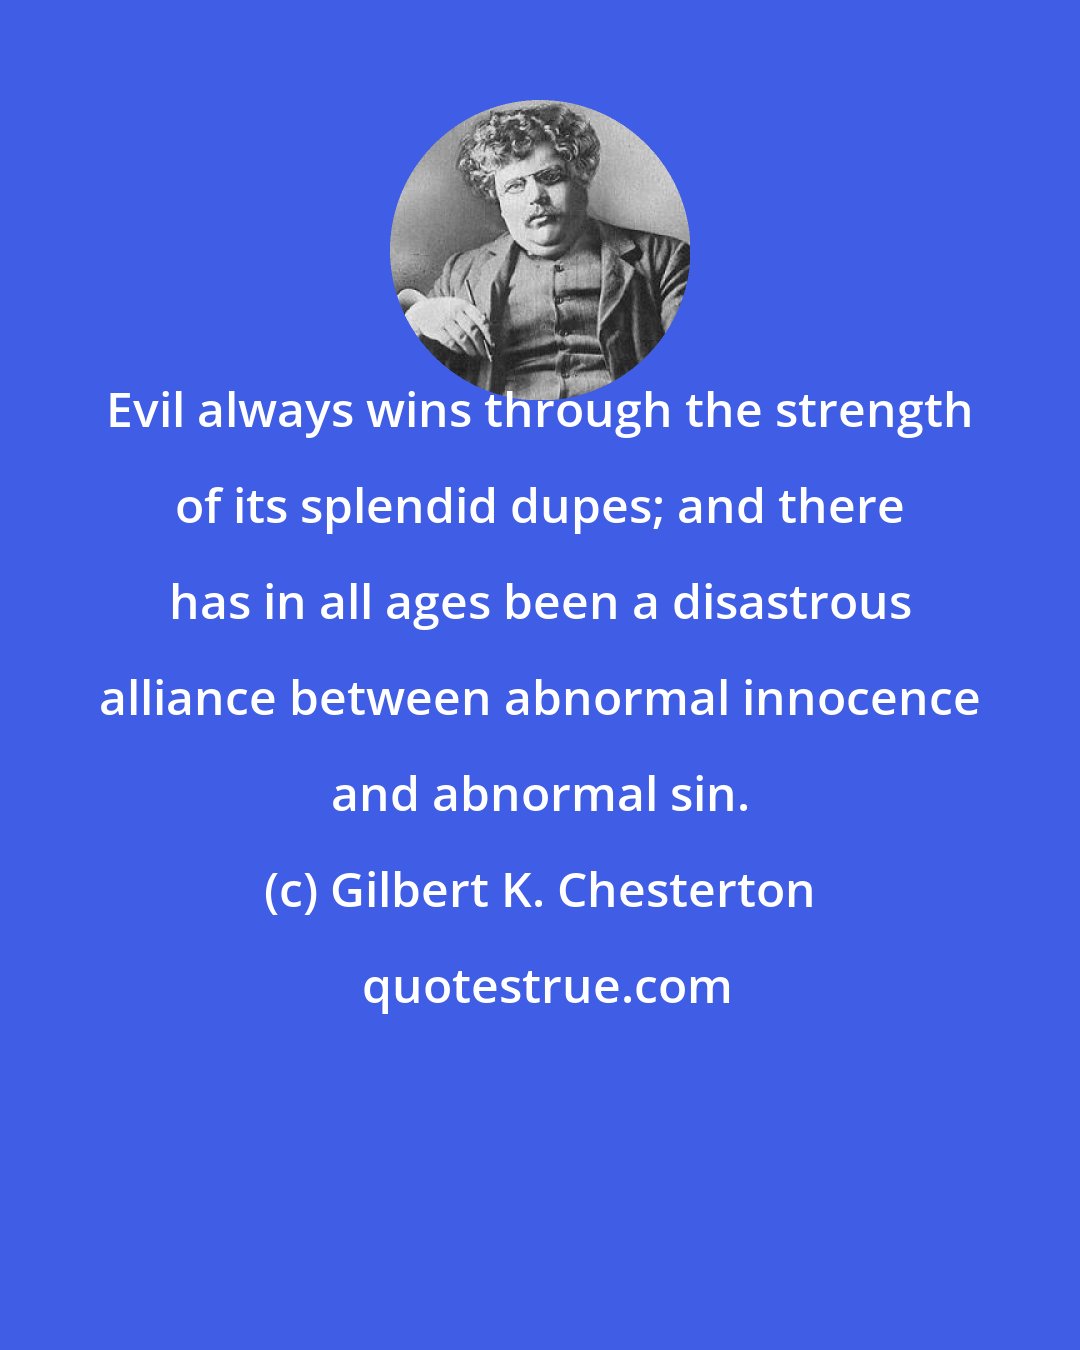 Gilbert K. Chesterton: Evil always wins through the strength of its splendid dupes; and there has in all ages been a disastrous alliance between abnormal innocence and abnormal sin.